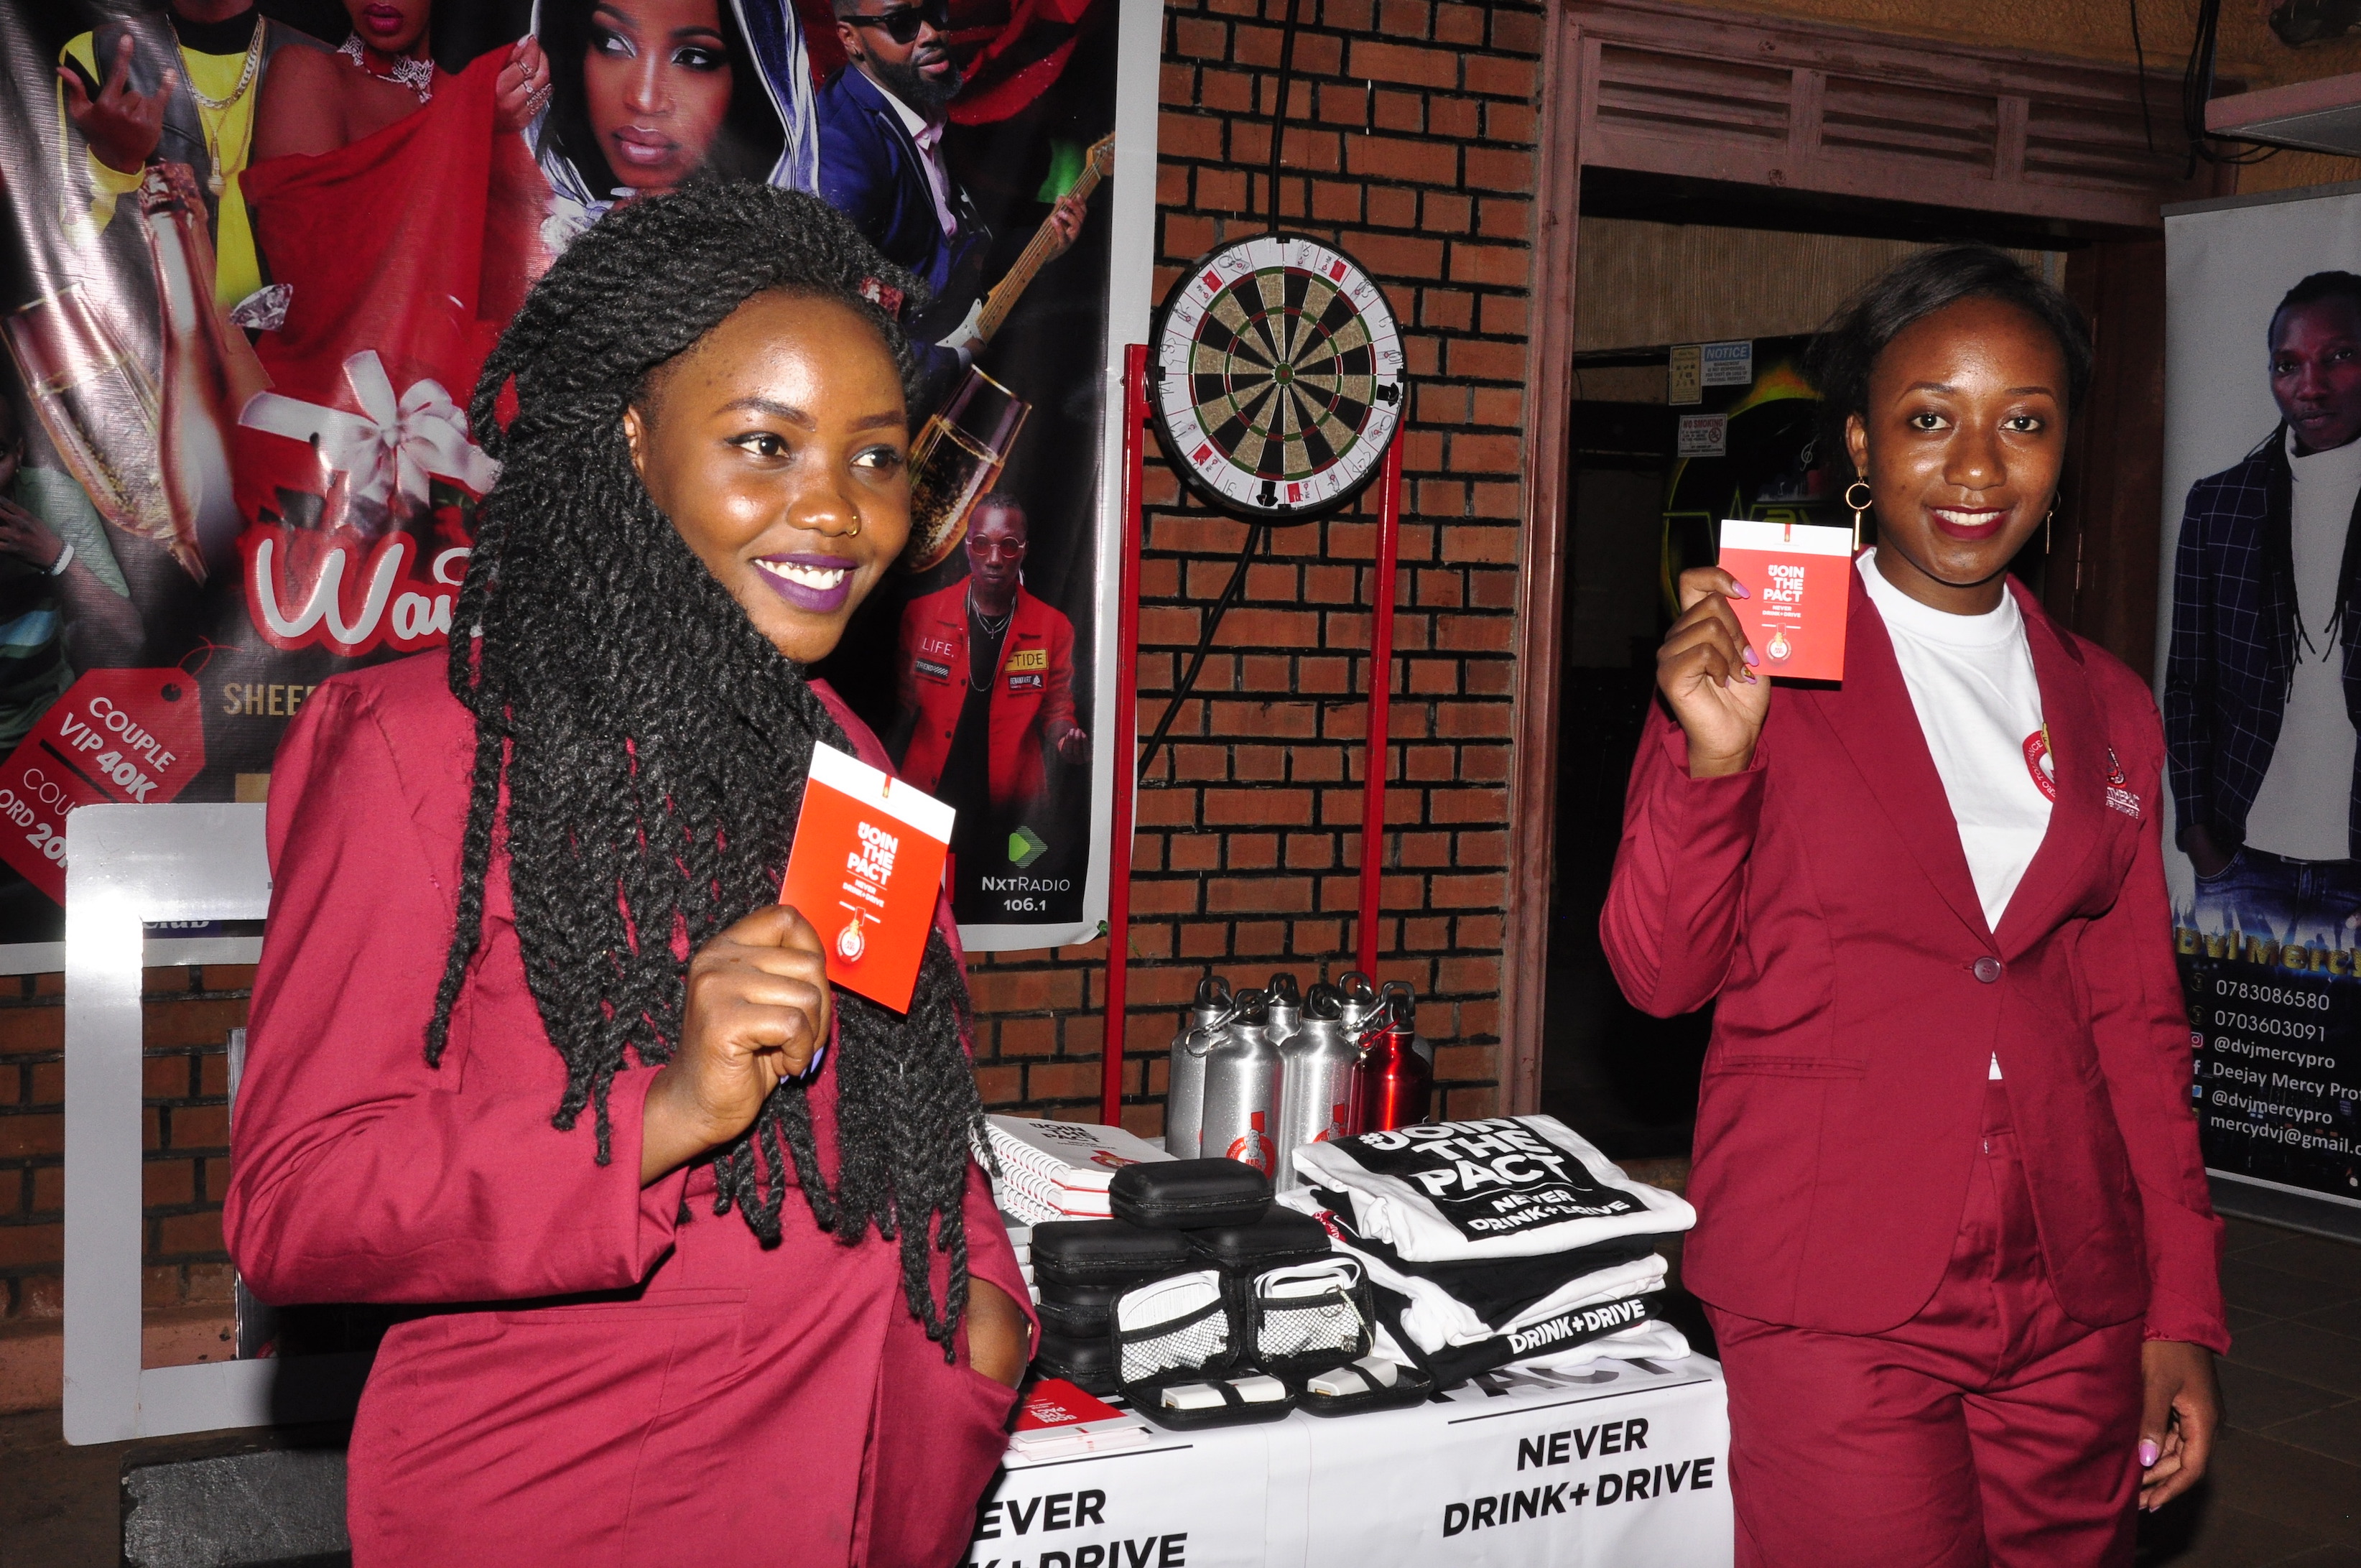 Uganda Breweries Limited (UBL) has embarked on a series of activations in Bars around Kampala as part of their responsible drinking campaign dubbed Red Card.